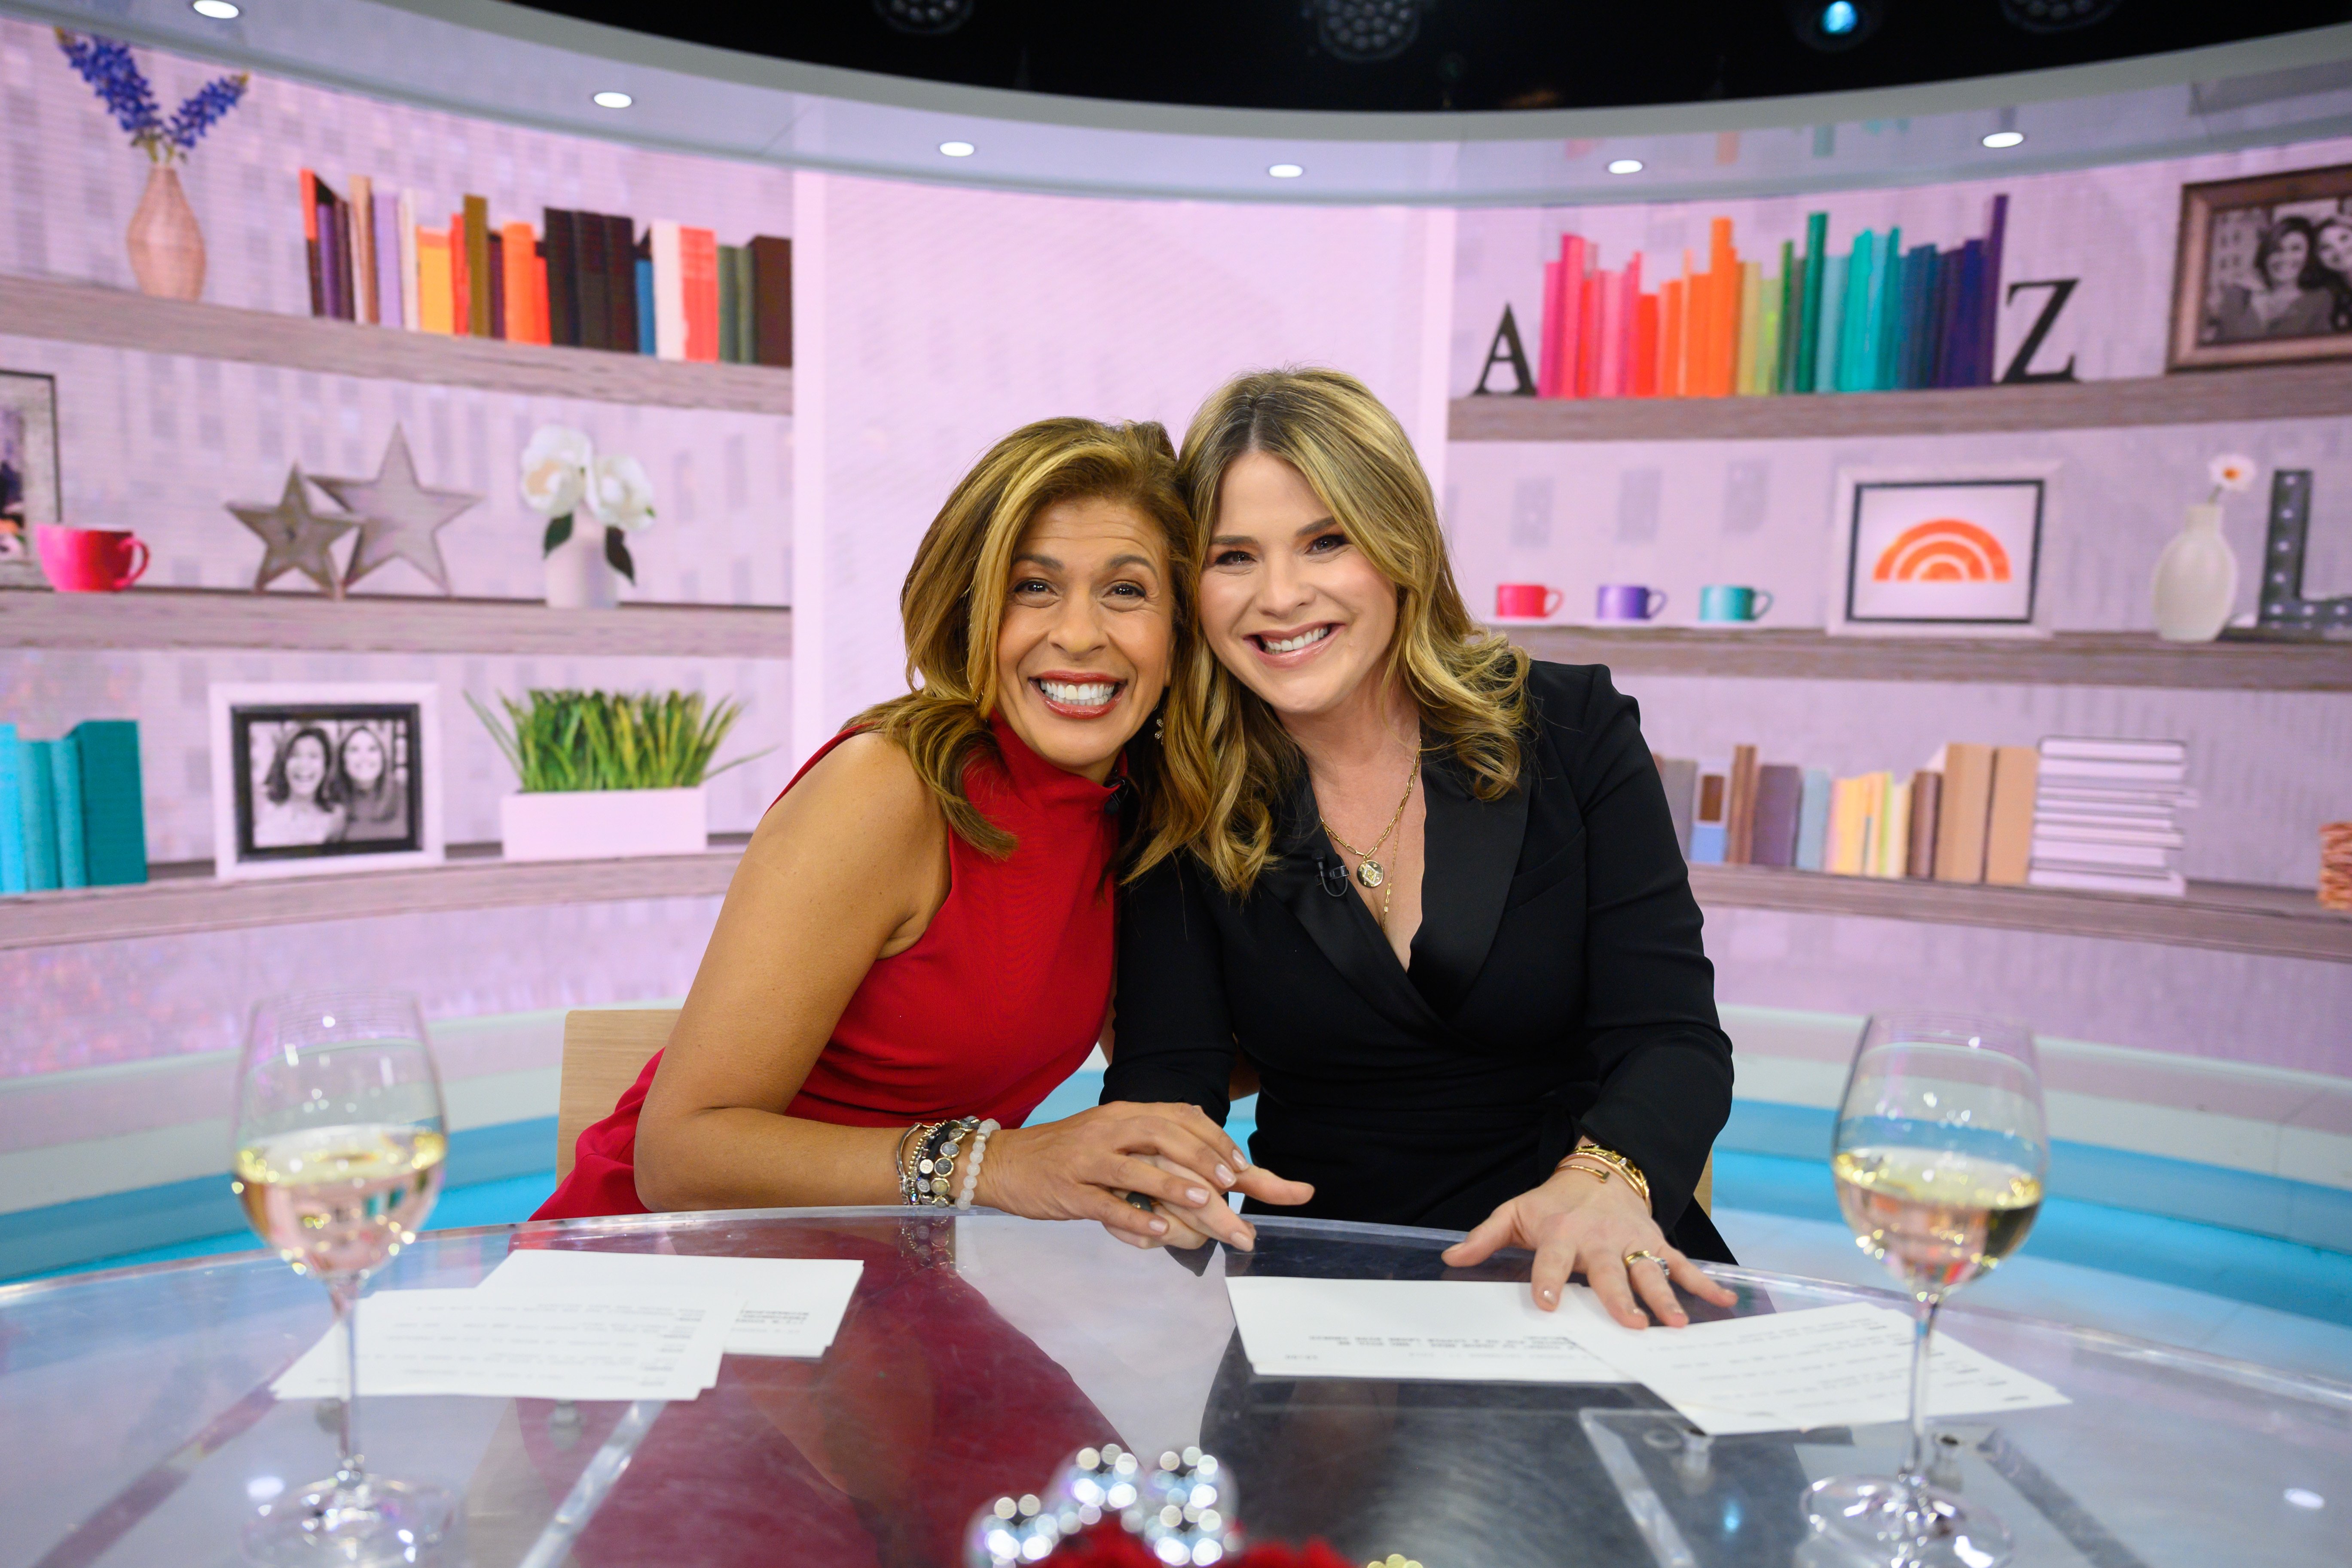 Hoda Kotb and Jenna Bush Hager on December 17, 2019 in New York City | Source: Getty Images